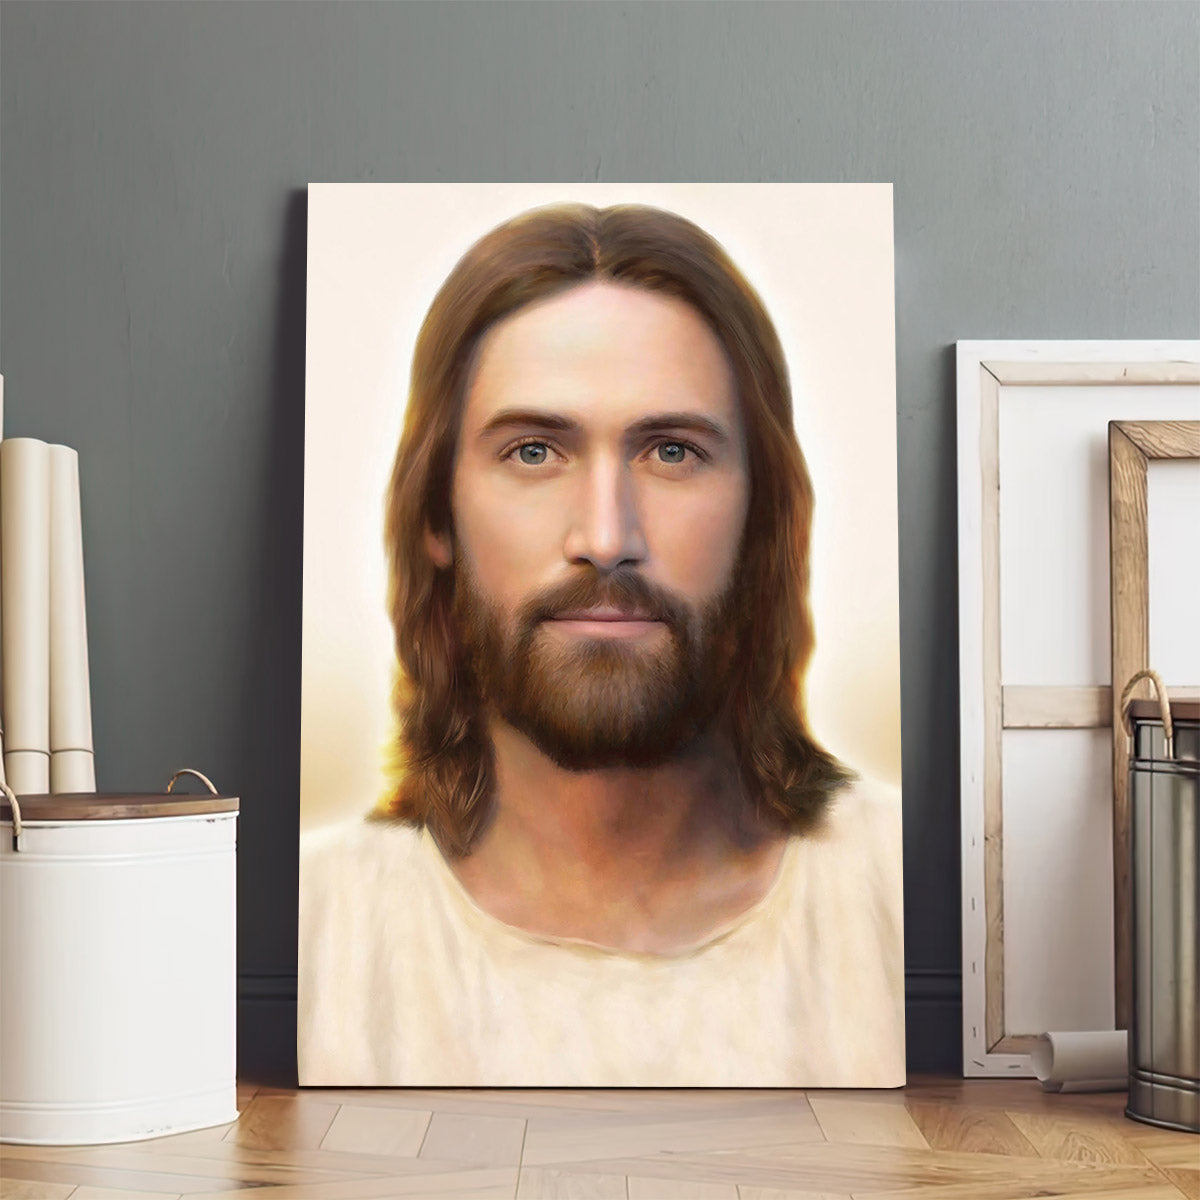 Light Of The World Minicard Canvas Picture - Jesus Christ Canvas Art - Christian Wall Canvas